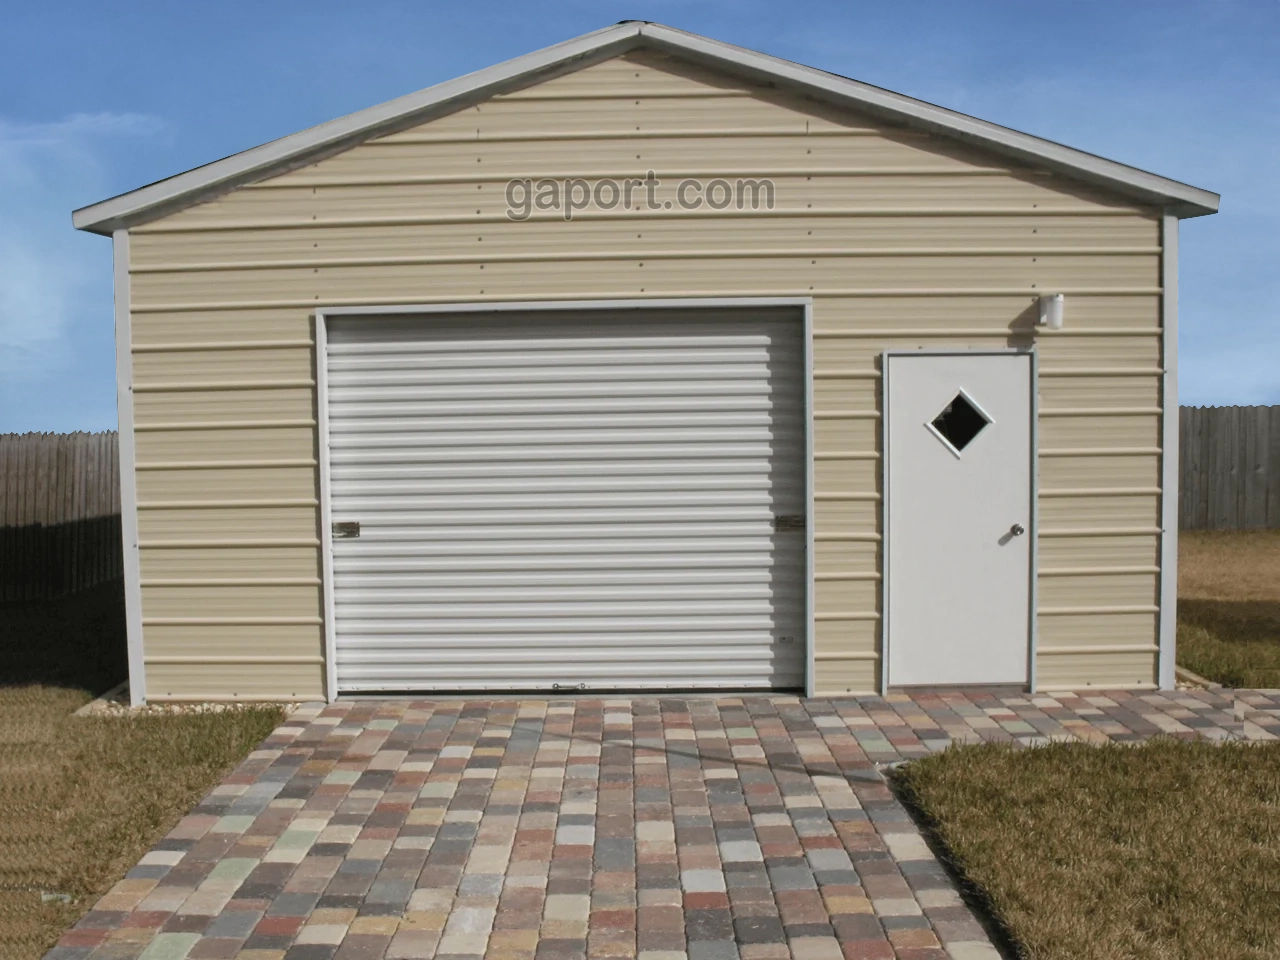 See the side length of this 25 foot long metal garage